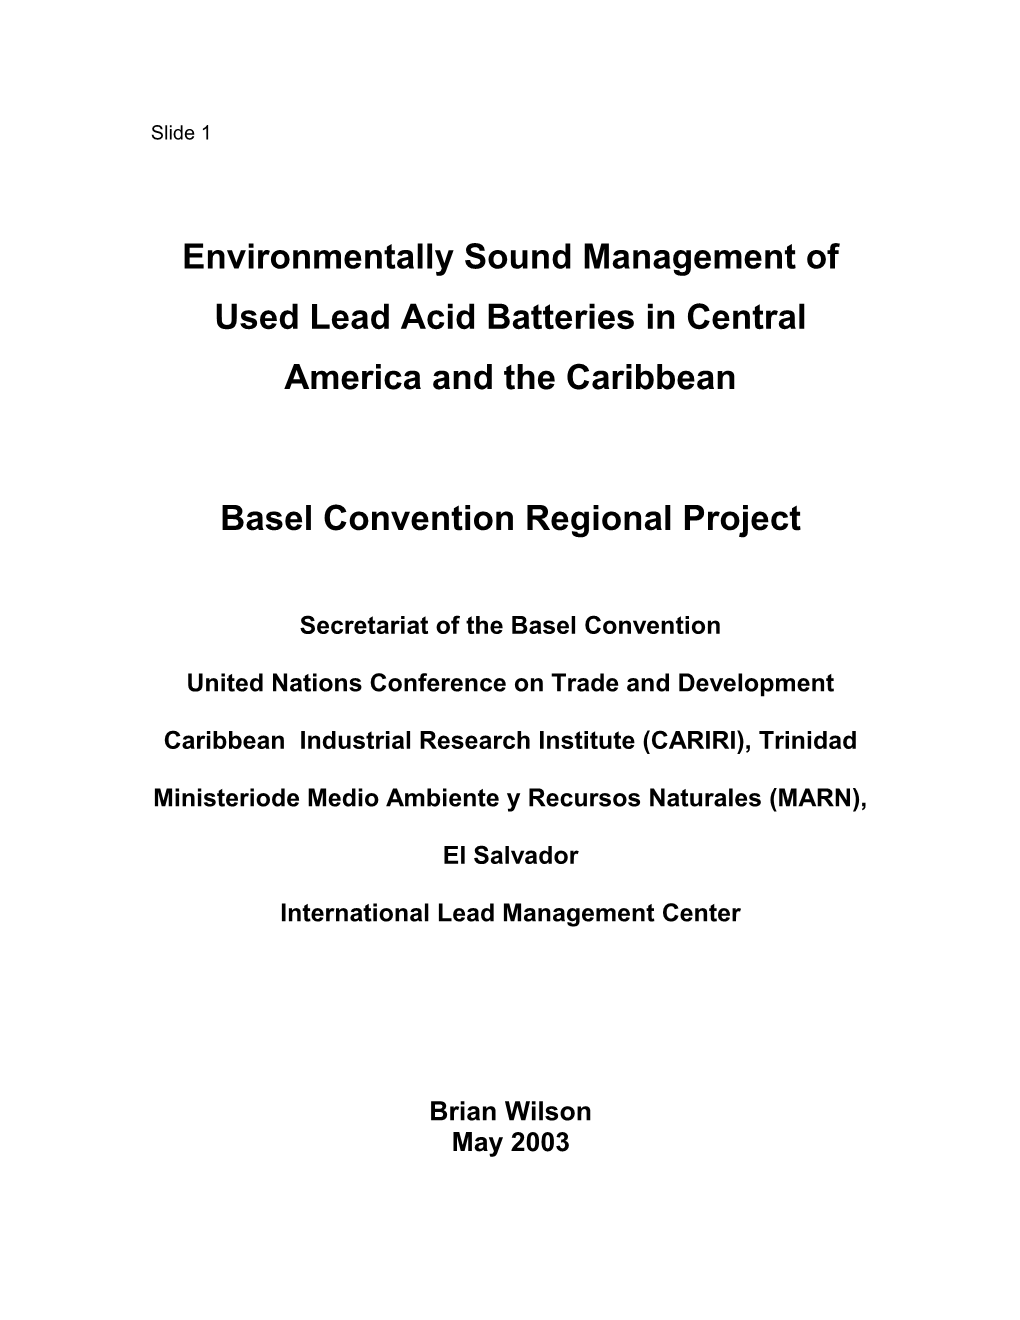 Environmentally Sound Management of Used Lead Acid Batteries in Central America and The